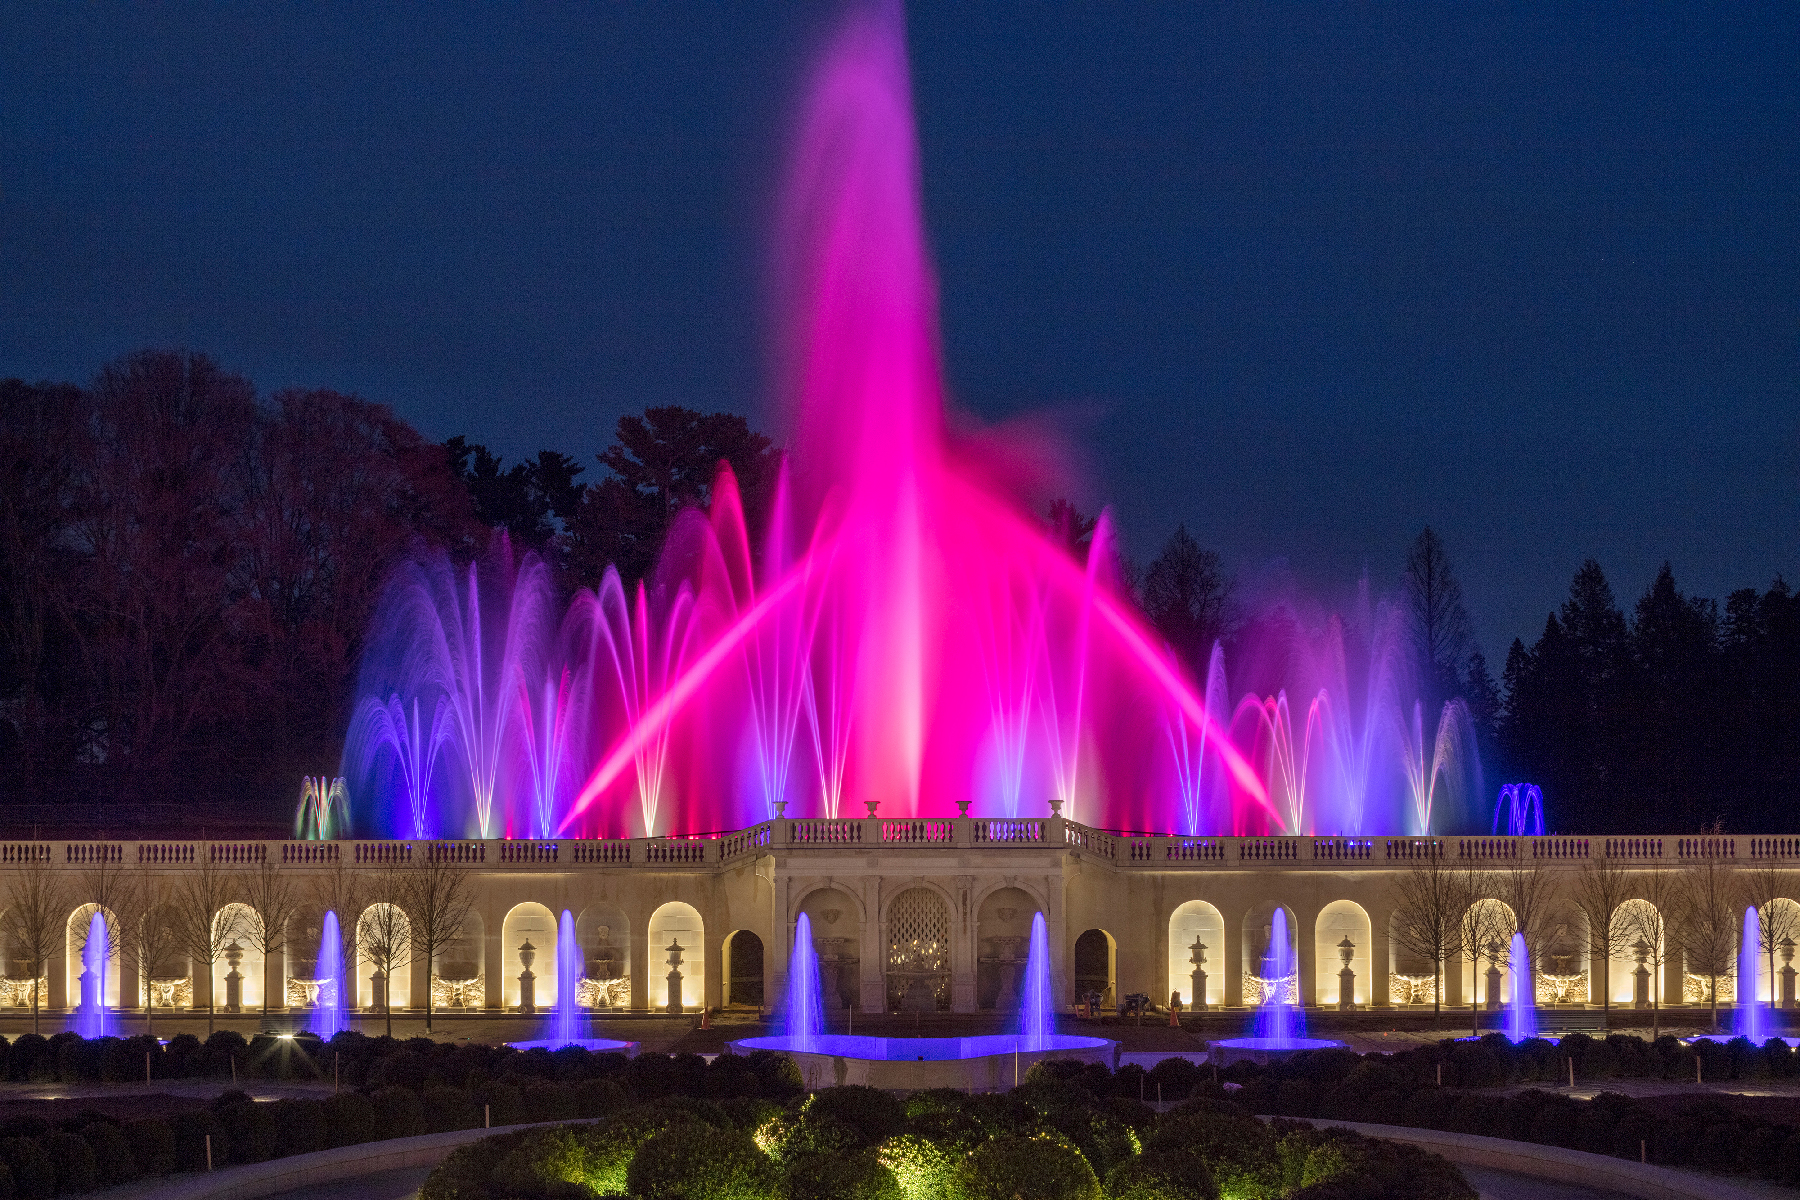 Colorful fountains set to music at Longwood Gardens in Wilmington, Delaware.